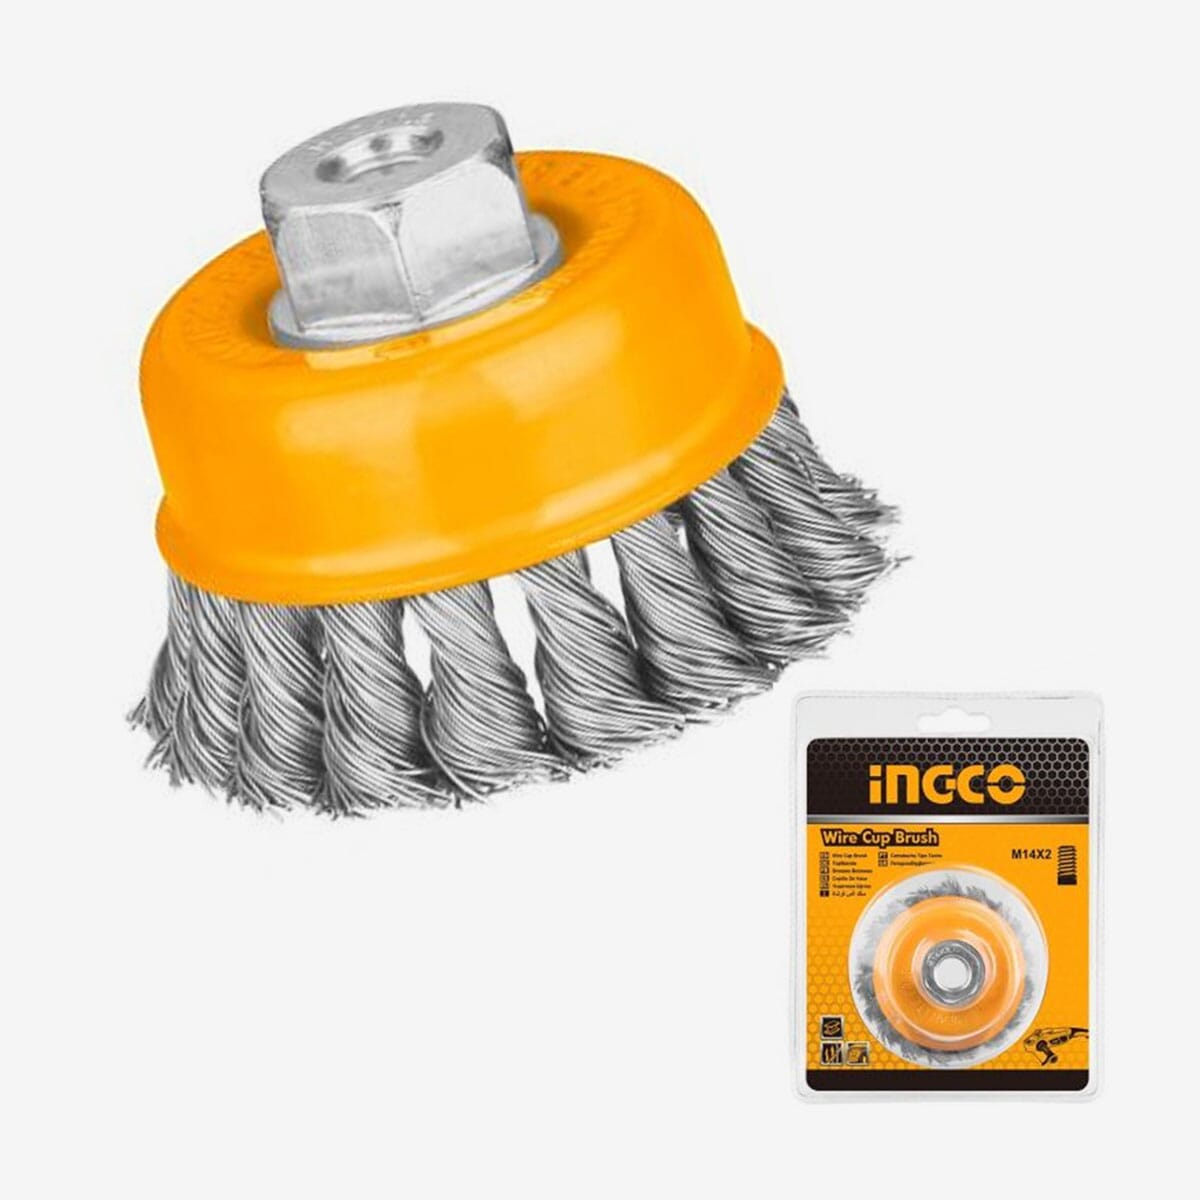 Ingco Cup Brush Twisted Wire with Nut 3" & 4" - WB20751 & WB21001 - Buy Online in Accra, Ghana at Supply Master Wire Wheels & Brushes Buy Tools hardware Building materials